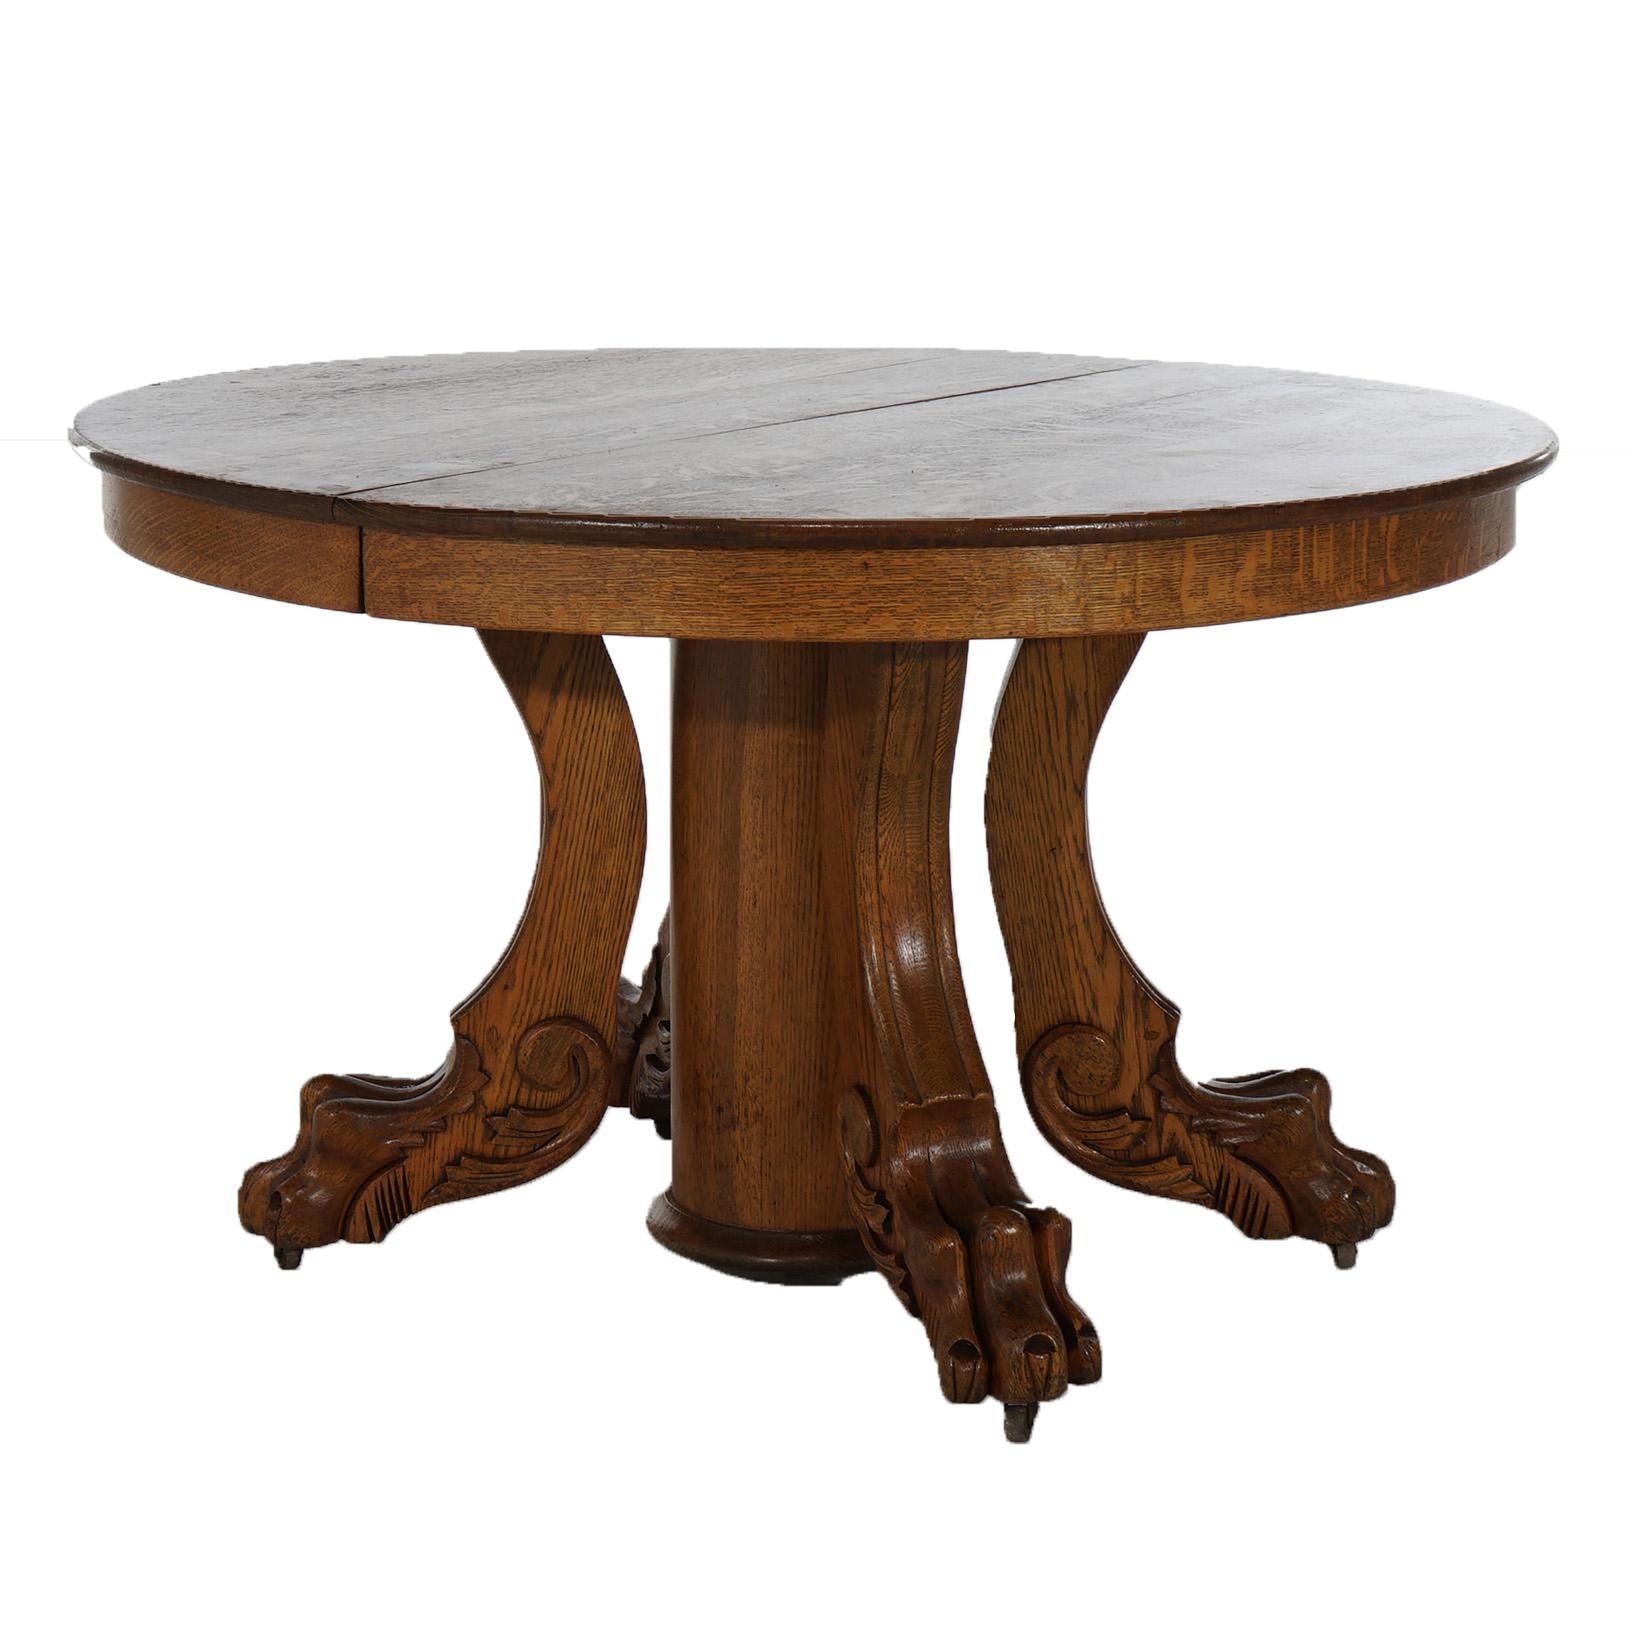 ***Ask About Reduced In-House Delivery Rates - Reliable Professional Service & Fully Insured***
Antique Horner School Round Carved Oak Clawfoot Dining Table & Six Leaves C1920

Measures - 95.75